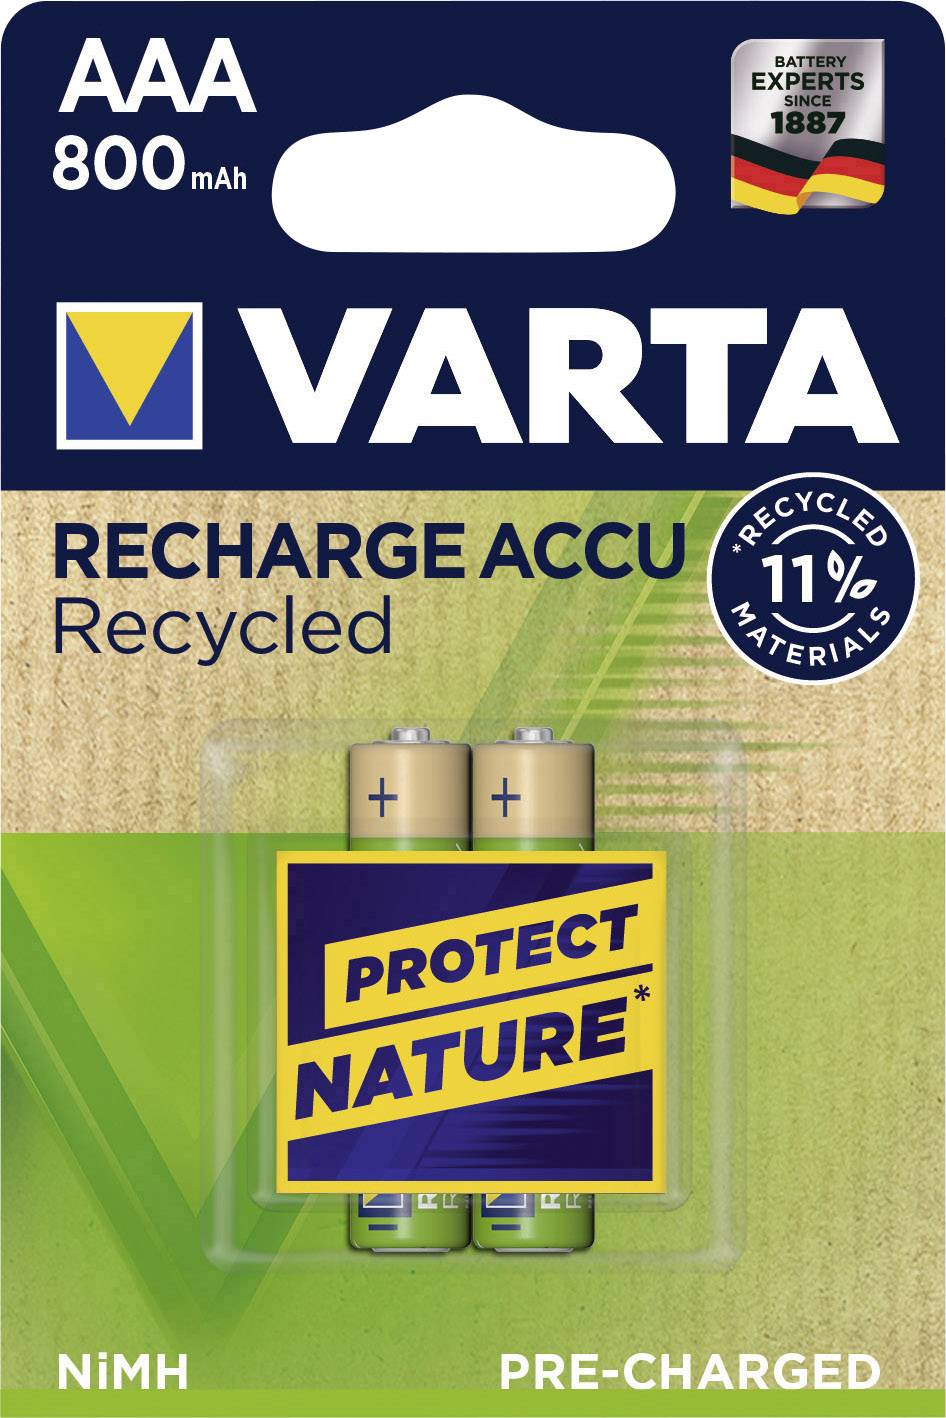 Varta Recycled rechargeable Accu (800mAh) AAAX2